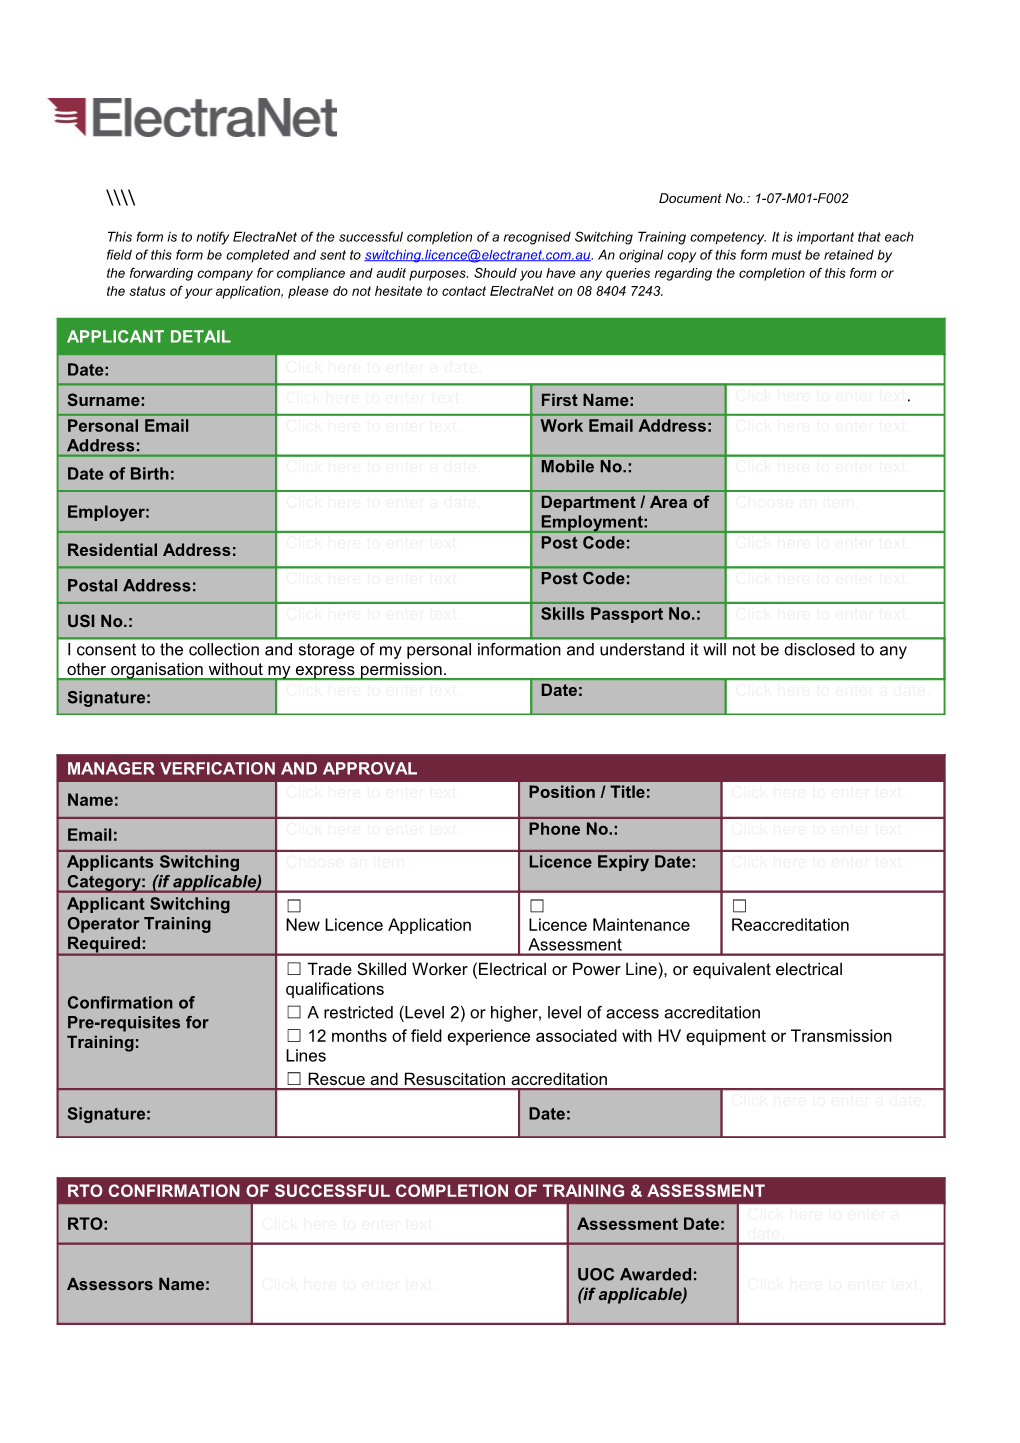 This Form Is to Notify Electranet of the Successful Completion of a Recognised Switching